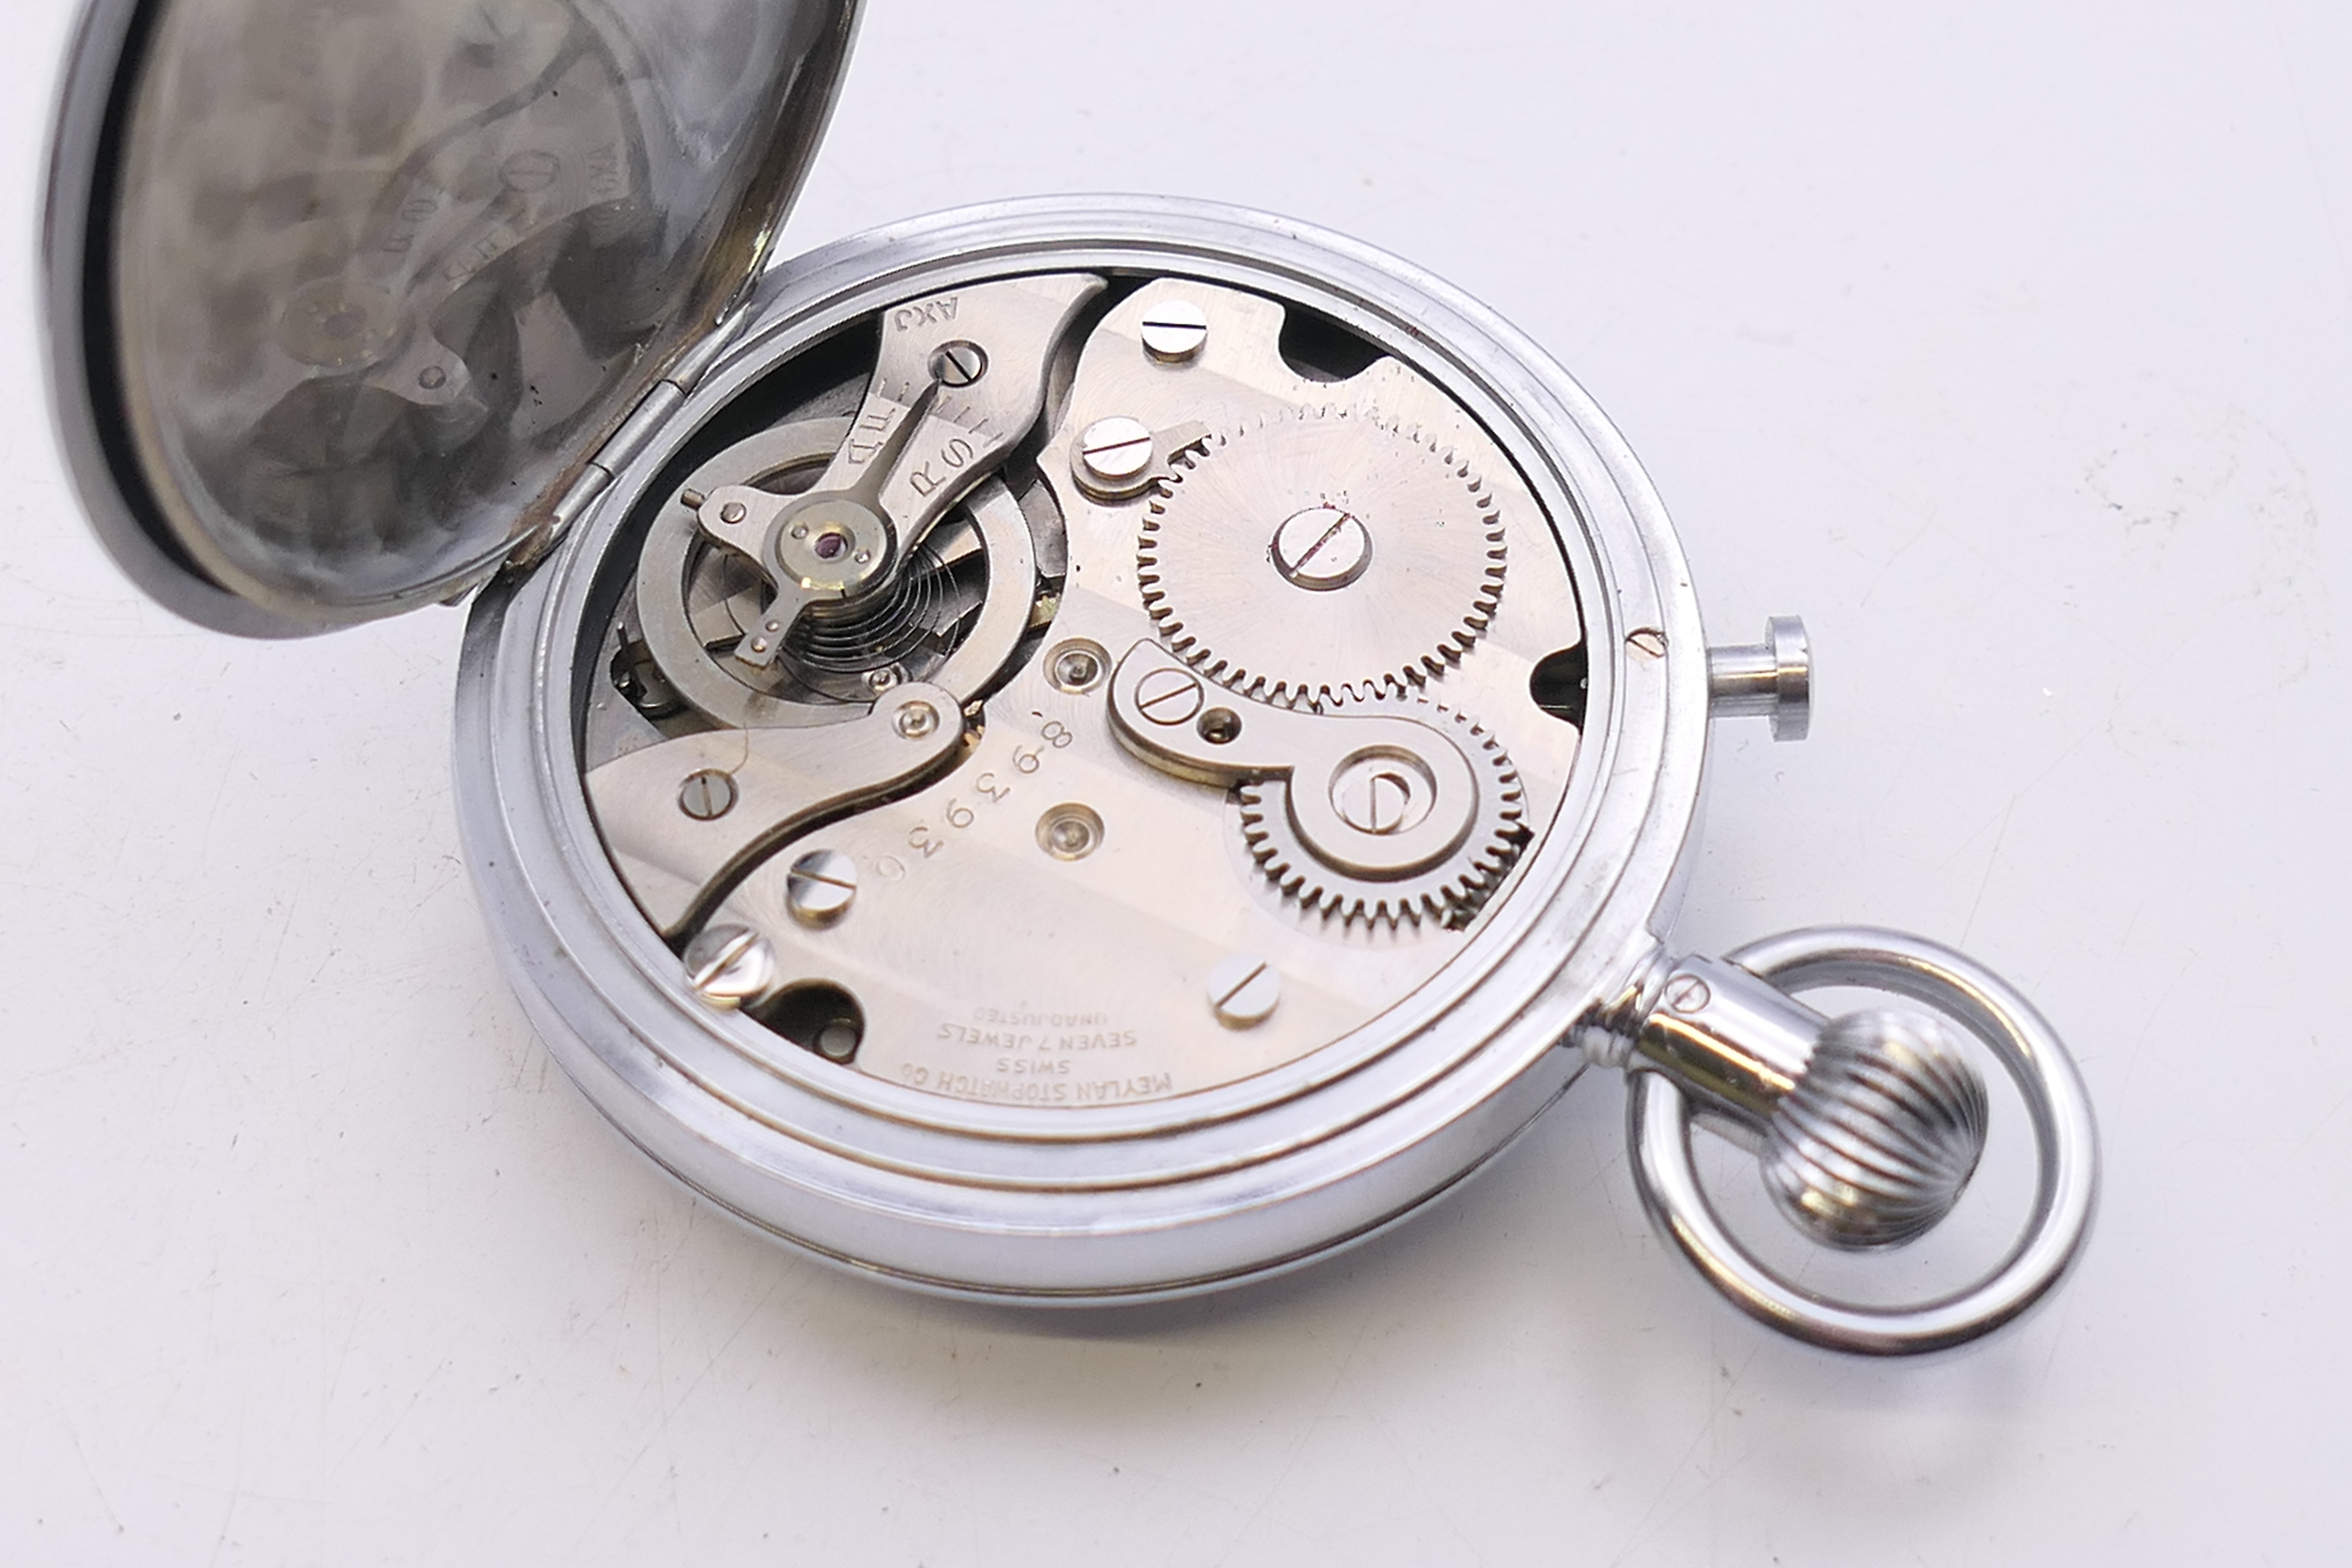 Two Art Deco gentleman's pocket watches, one marked Luxor, the other marked Premia Alfred Wolf Ltd, - Image 23 of 23